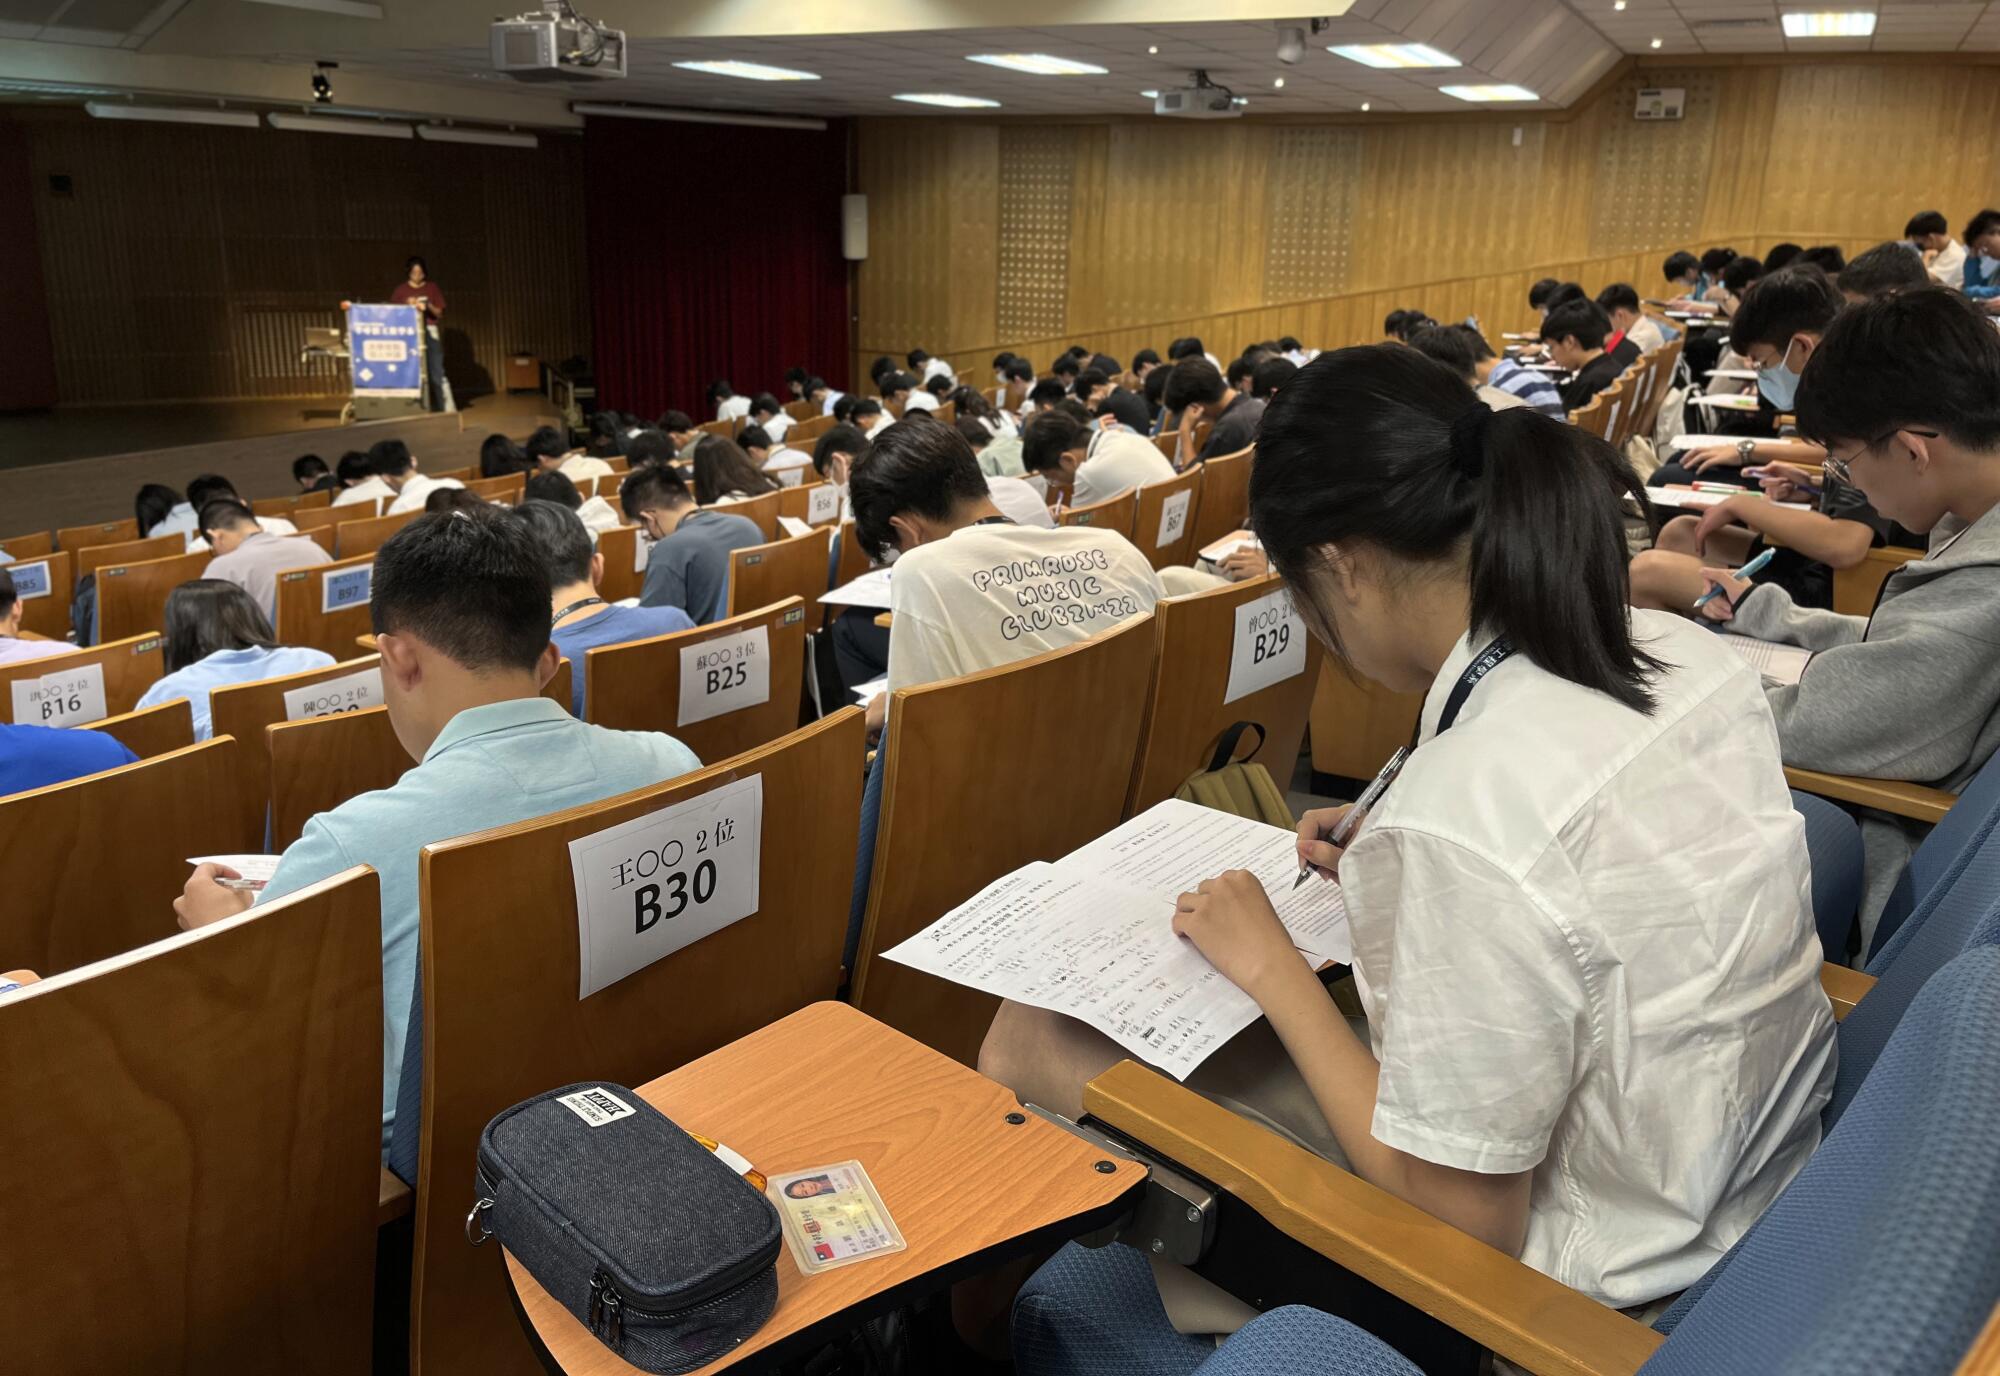 Students taking notes while sitting in an auditorium.